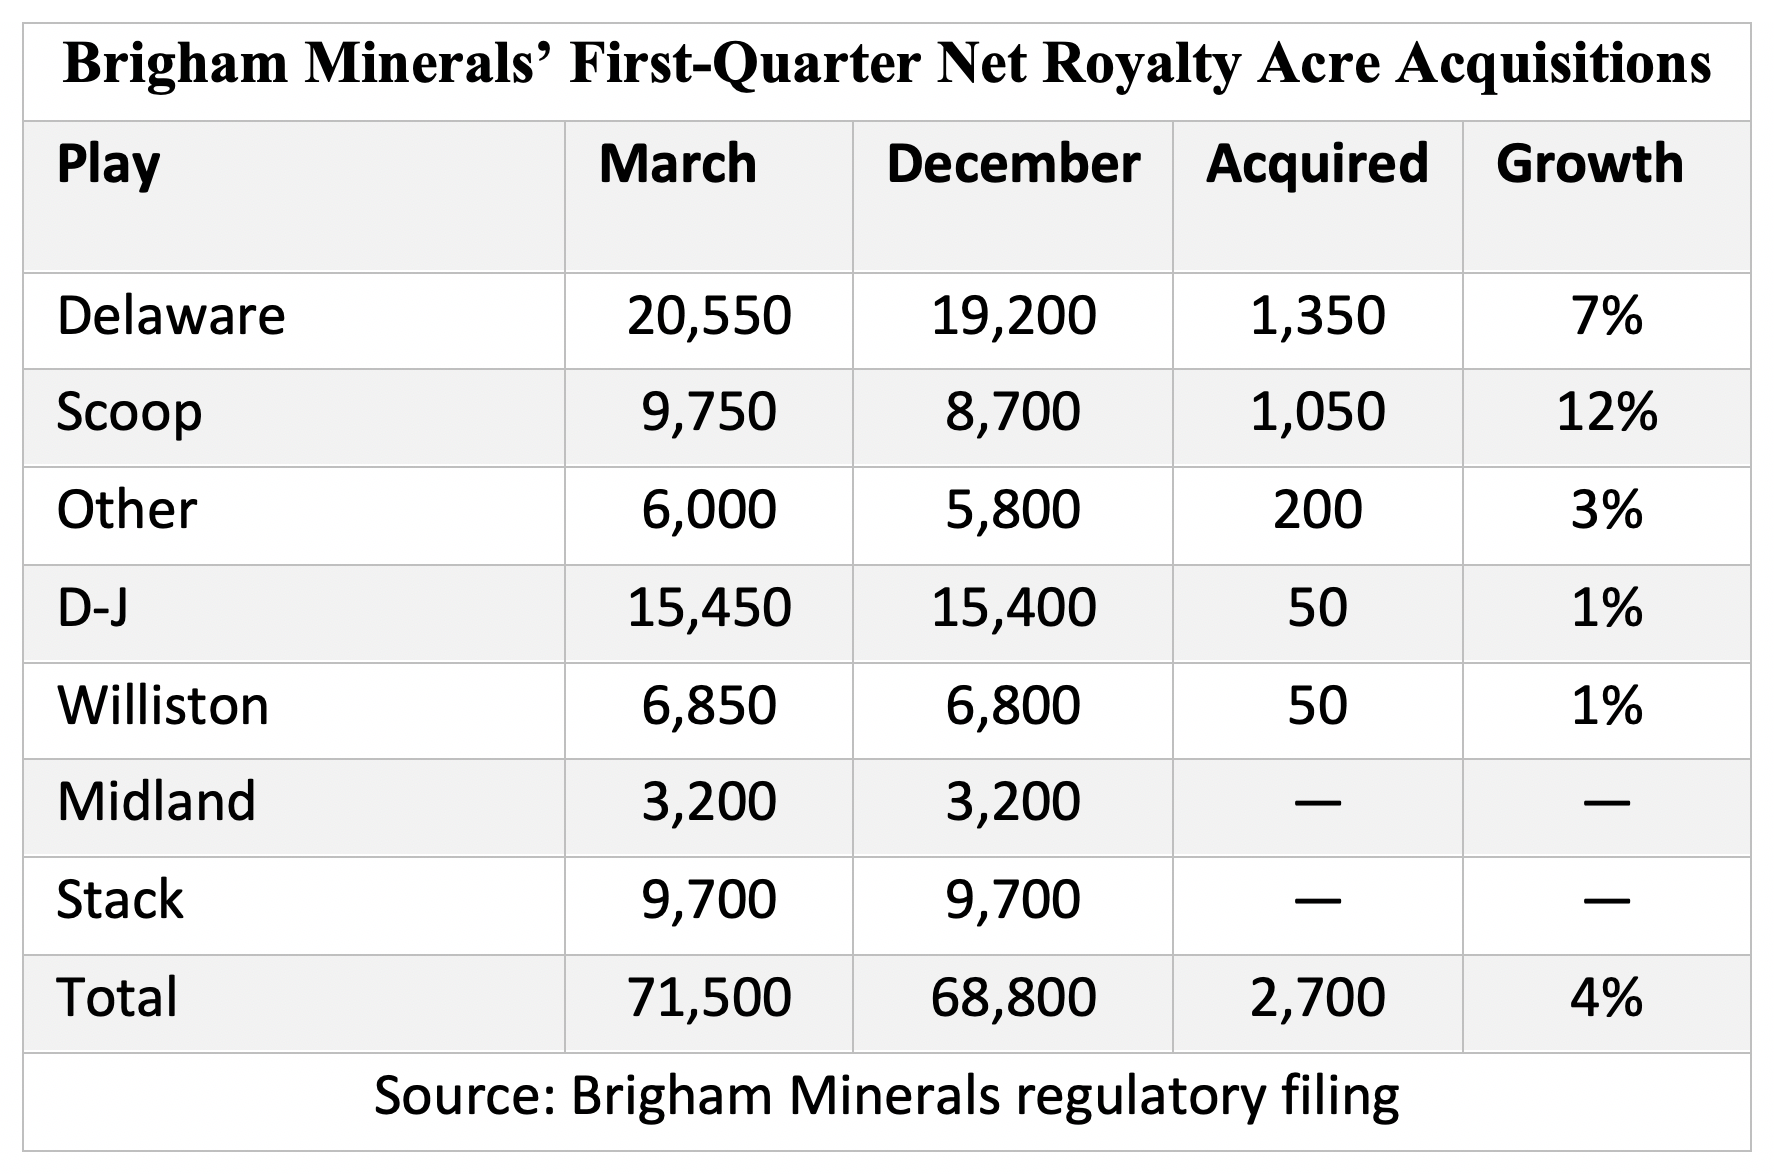 Brigham Minerals’ First-Quarter Net Royalty Acre Acquisitions